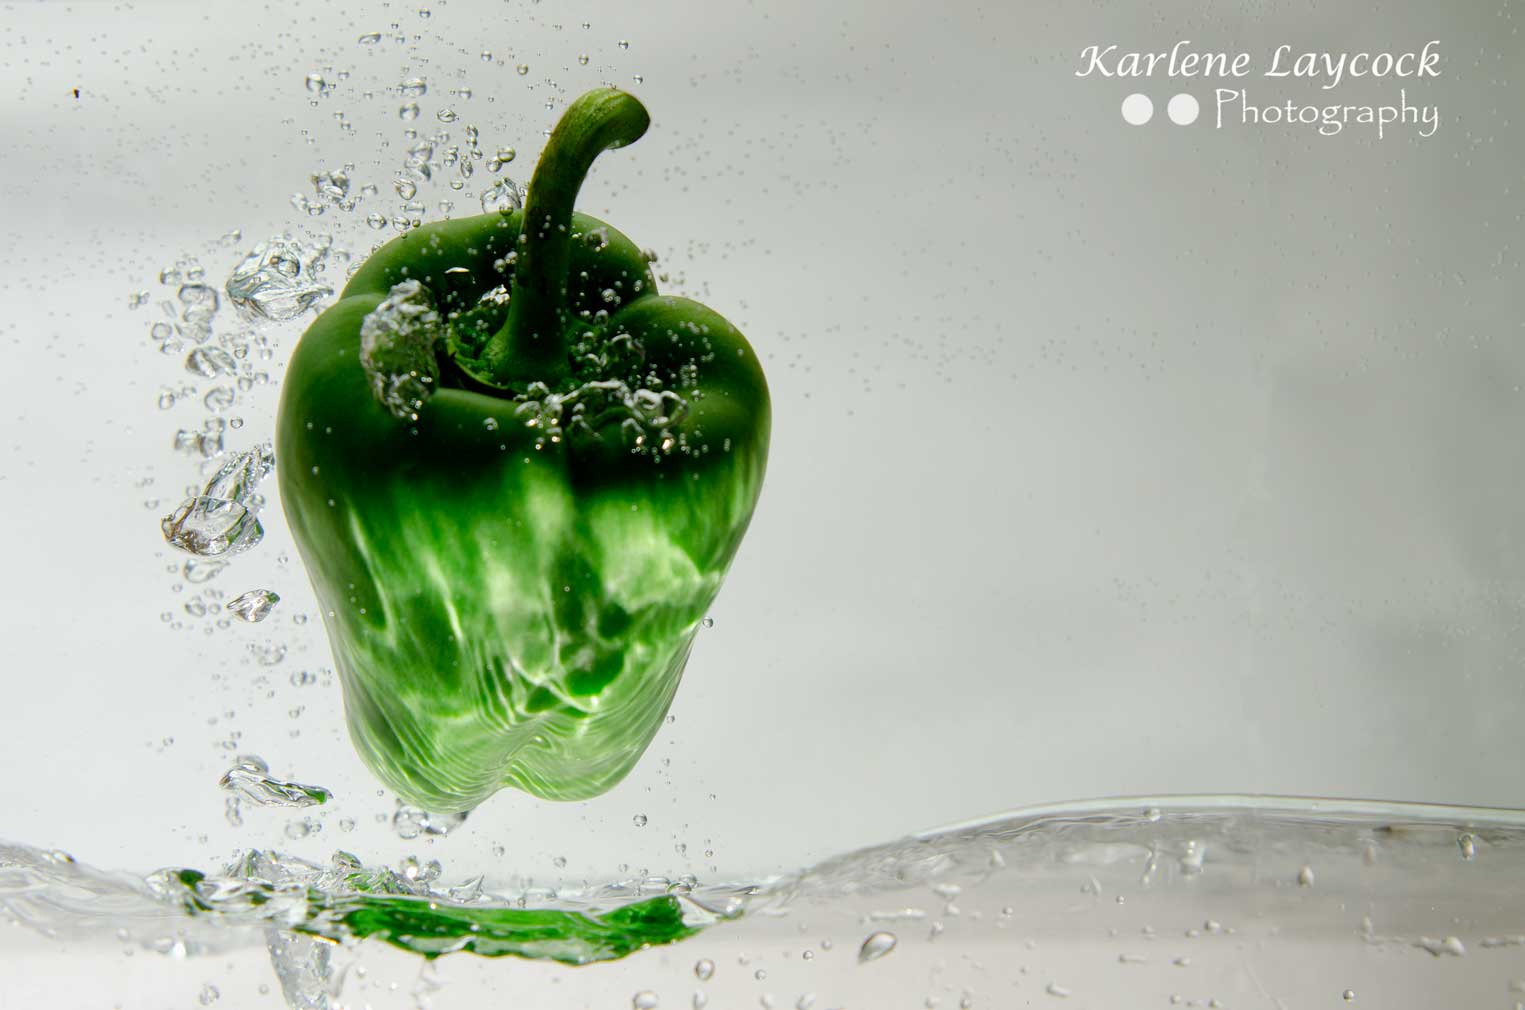 Green Pepper Suspended against a Grey Background with Water Bubbles